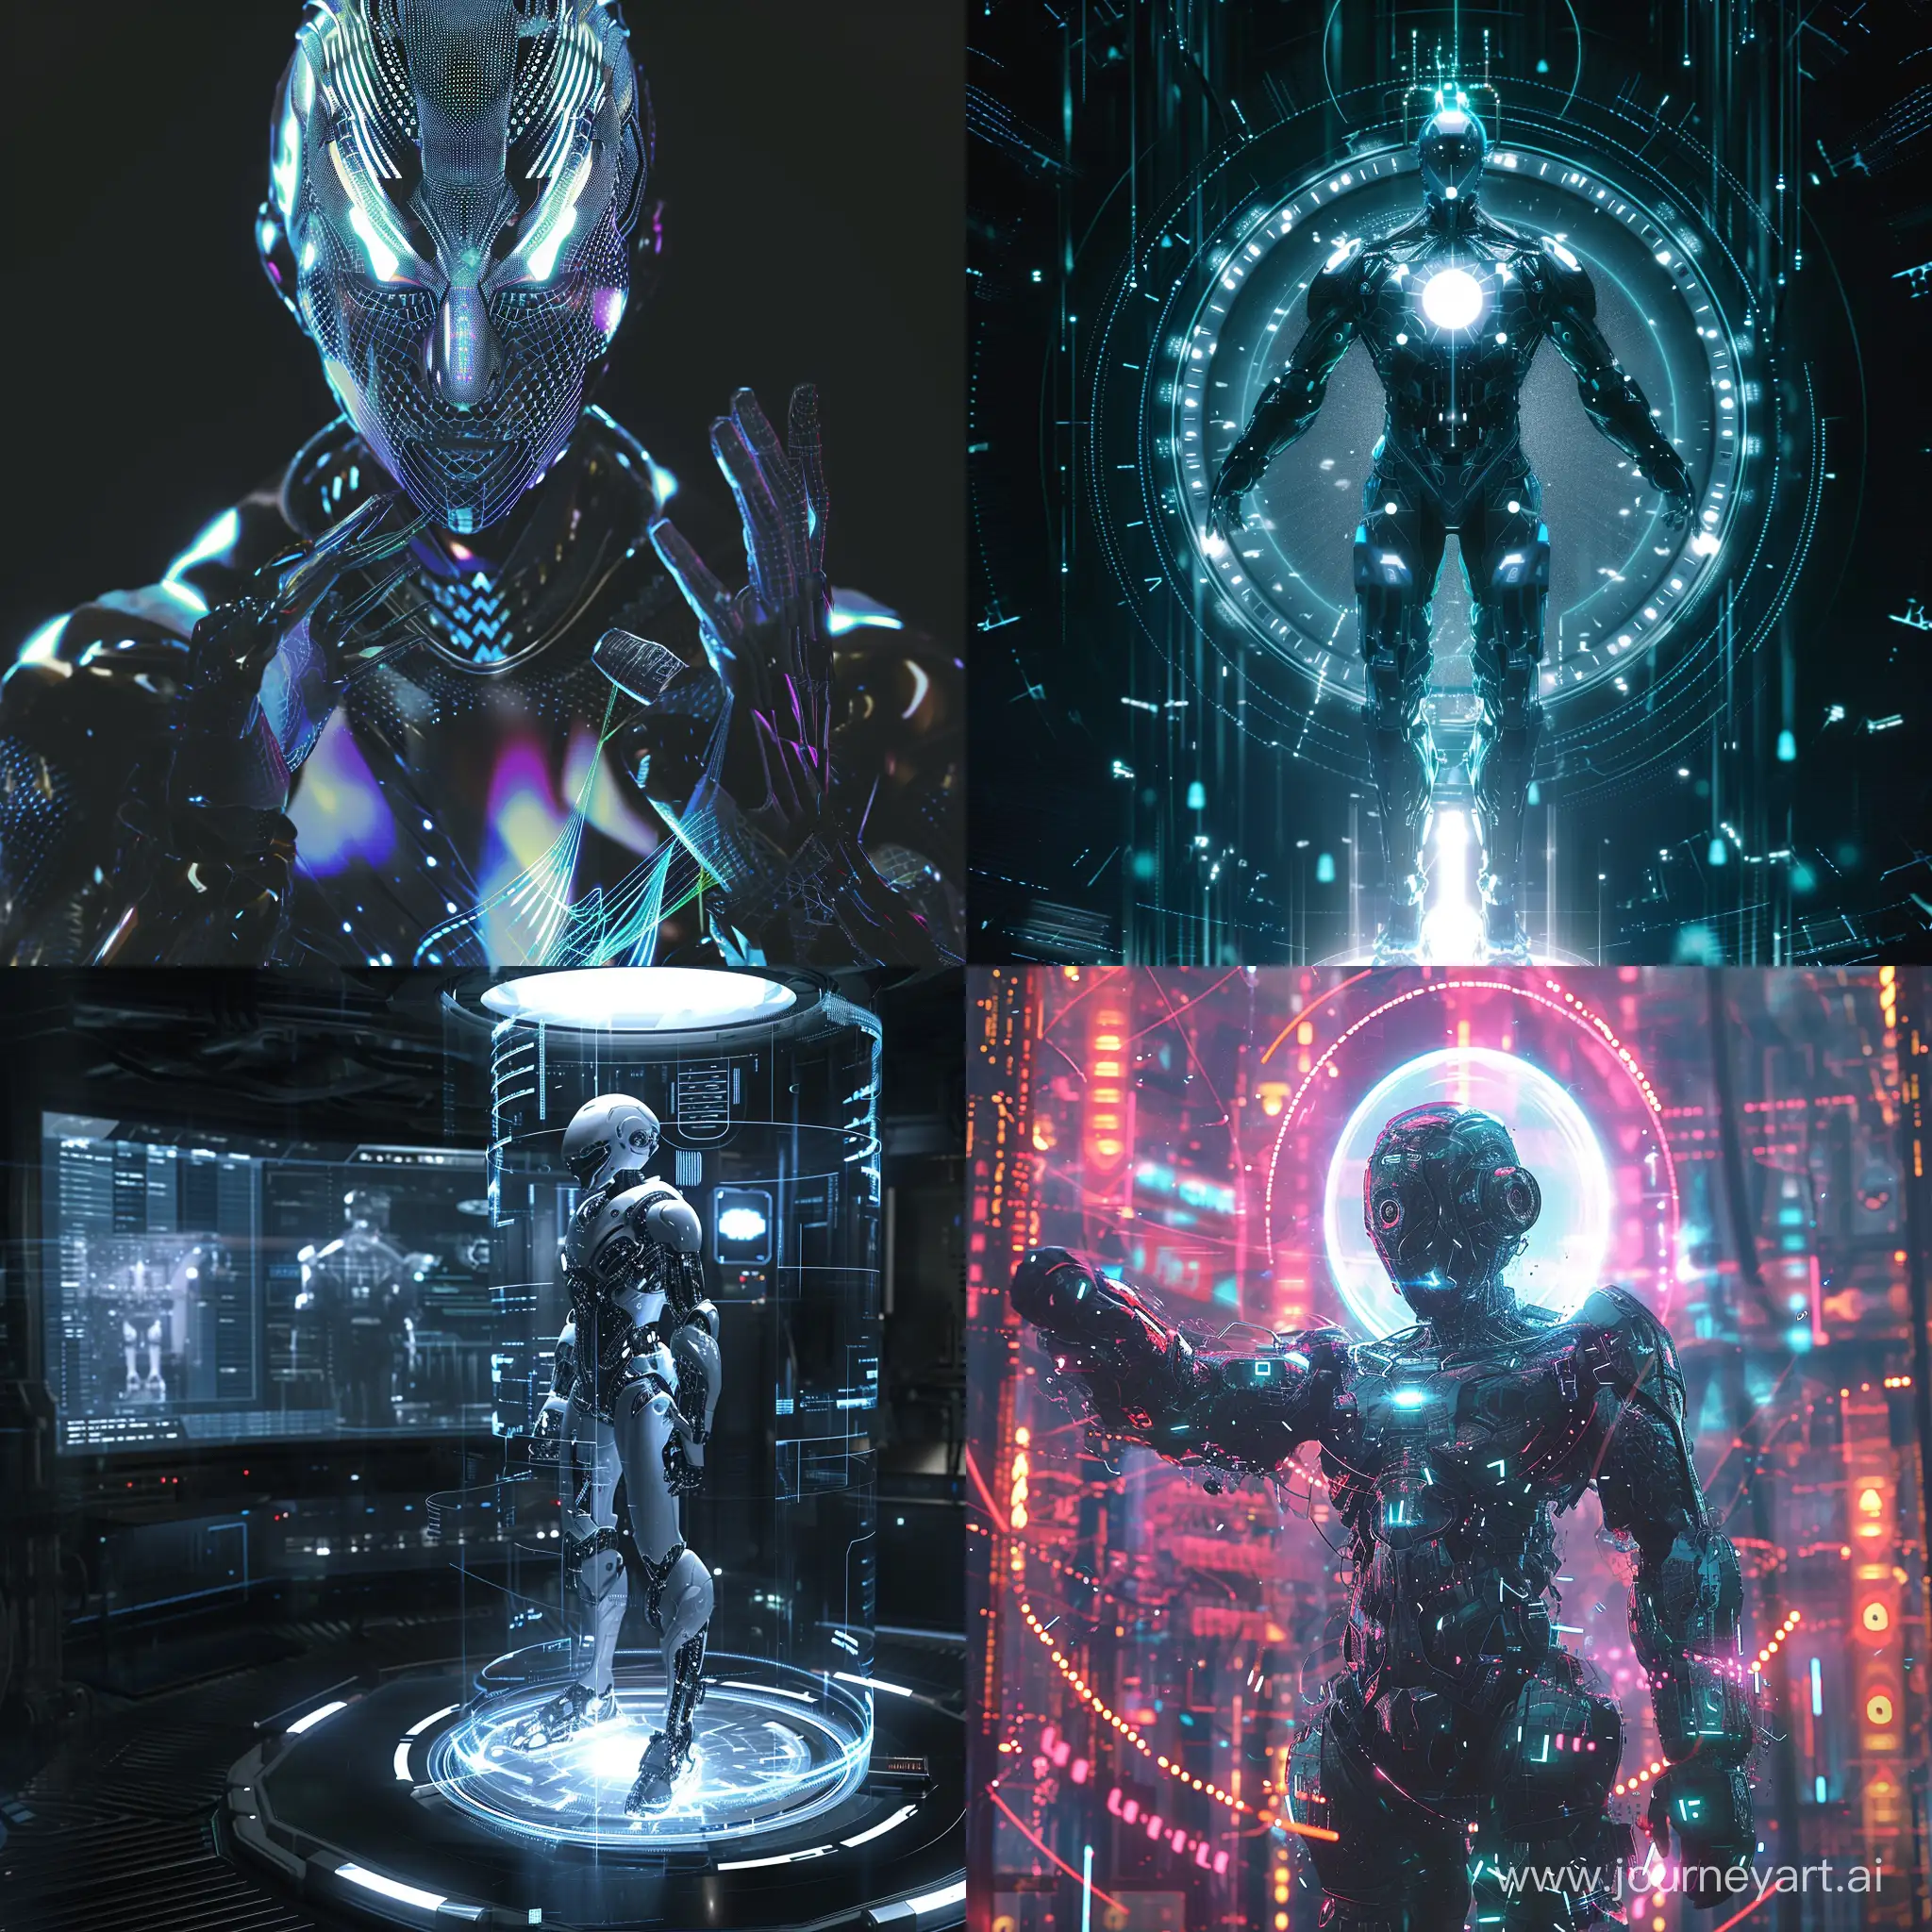 Subject: The main subject of the image is a Hologram::1.5 representation of a cybernetic white knight, emphasizing a futuristic and technologically advanced theme. The hologram is the focal point, creating a visually striking centerpiece. Setting: The setting is a sci-fi environment, characterized by sleek and minimalist design elements. The use of advanced technology is evident, with holographic projections contributing to the futuristic atmosphere. The color palette likely includes cool tones to enhance the high- tech ambiance. Background: The background is carefully chosen to complement the sci-fi theme, featuring intricate digital patterns or abstract shapes. These elements contribute to the overall sense of immersion and convey a sense of the digital realm. Style: The style of the image is characterized by a blend of cyberpunk aesthetics and futuristic elements. The cybernetic white knight is likely to have sleek, angular designs, giving it a cutting- edge and modern appearance. Coloring: The color scheme leans towards a palette dominated by blues, purples, and silvers to convey a sense of technological sophistication. Neon accents may be used to add vibrancy and highlight key elements. Action: The holographic white knight may be depicted in a dynamic pose, suggesting readiness for action. This adds an element of excitement and energy to the image, engaging viewers and creating a sense of movement. Стоит в полный рост. --v 6